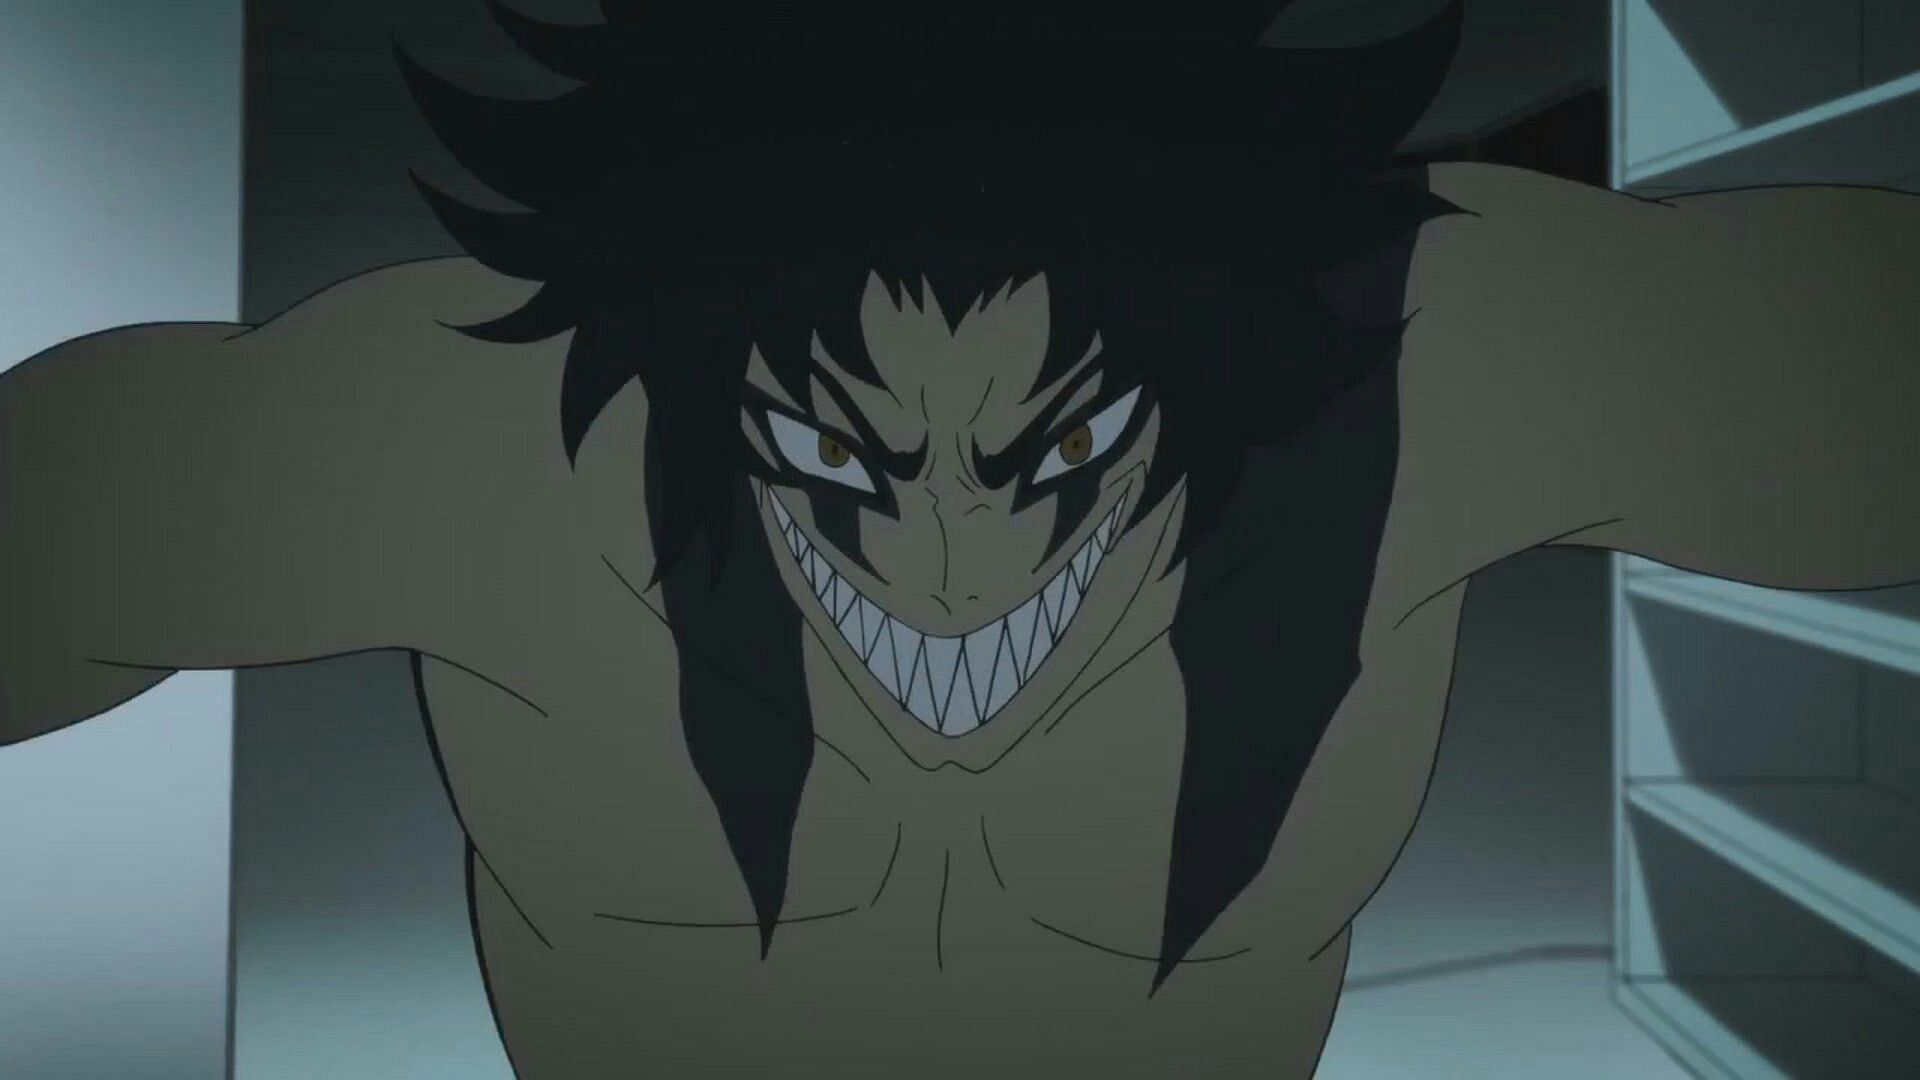 Demon or not, Akira is still a crybaby at heart (Image credit: Ichiro Okouchi, Devilman Crybaby)